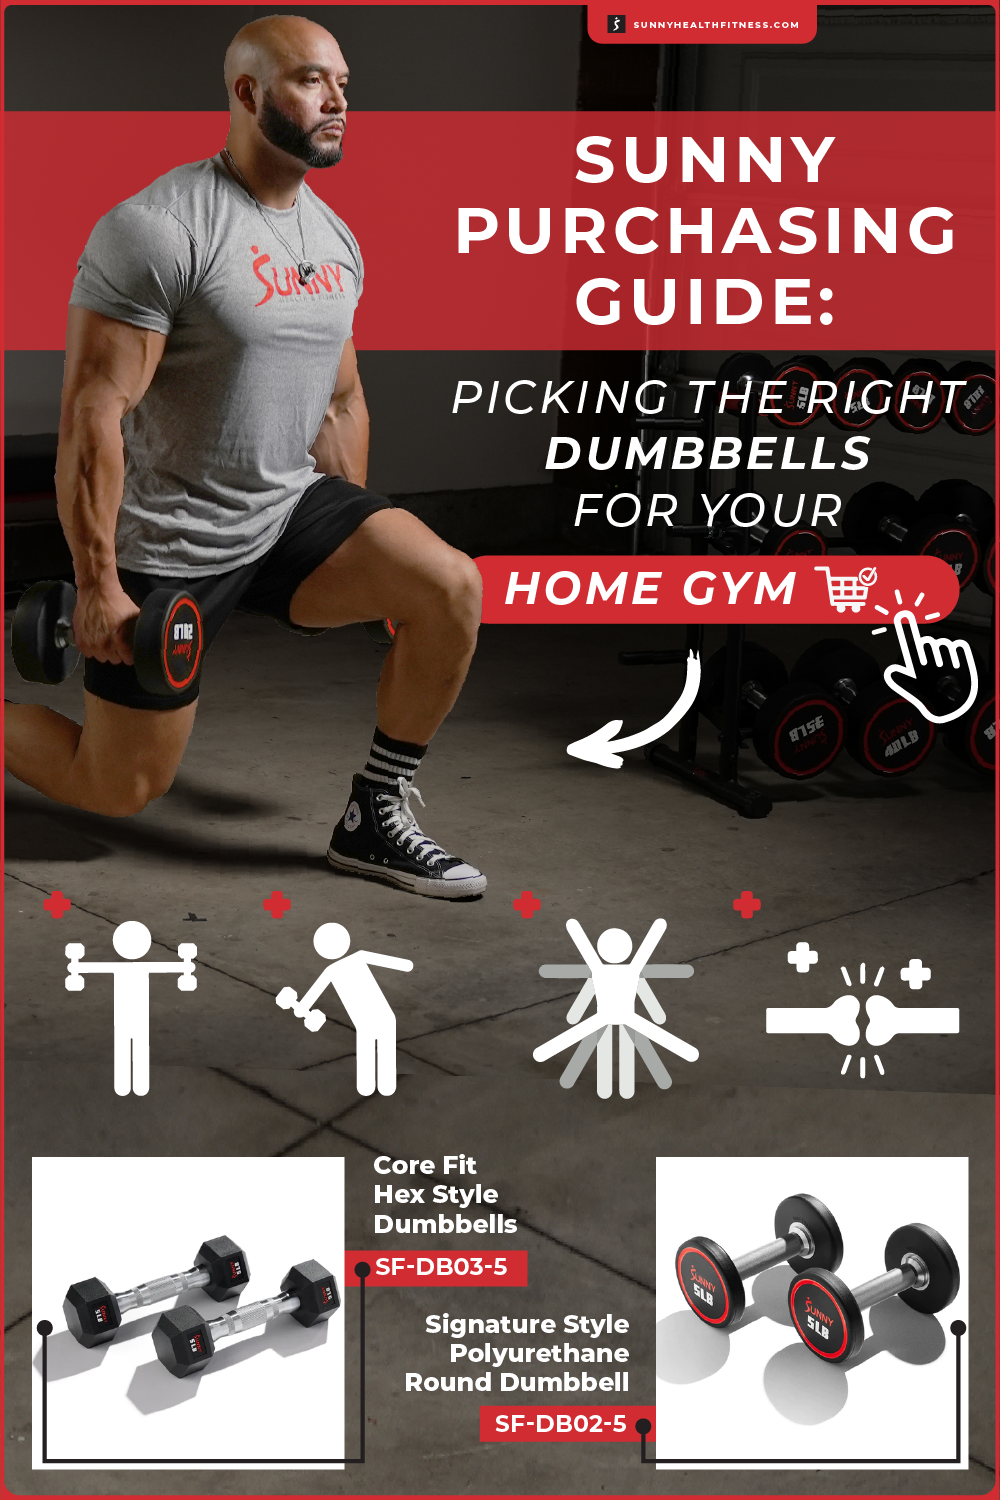 Sunny Dumbbell Purchasing Guide Infographic